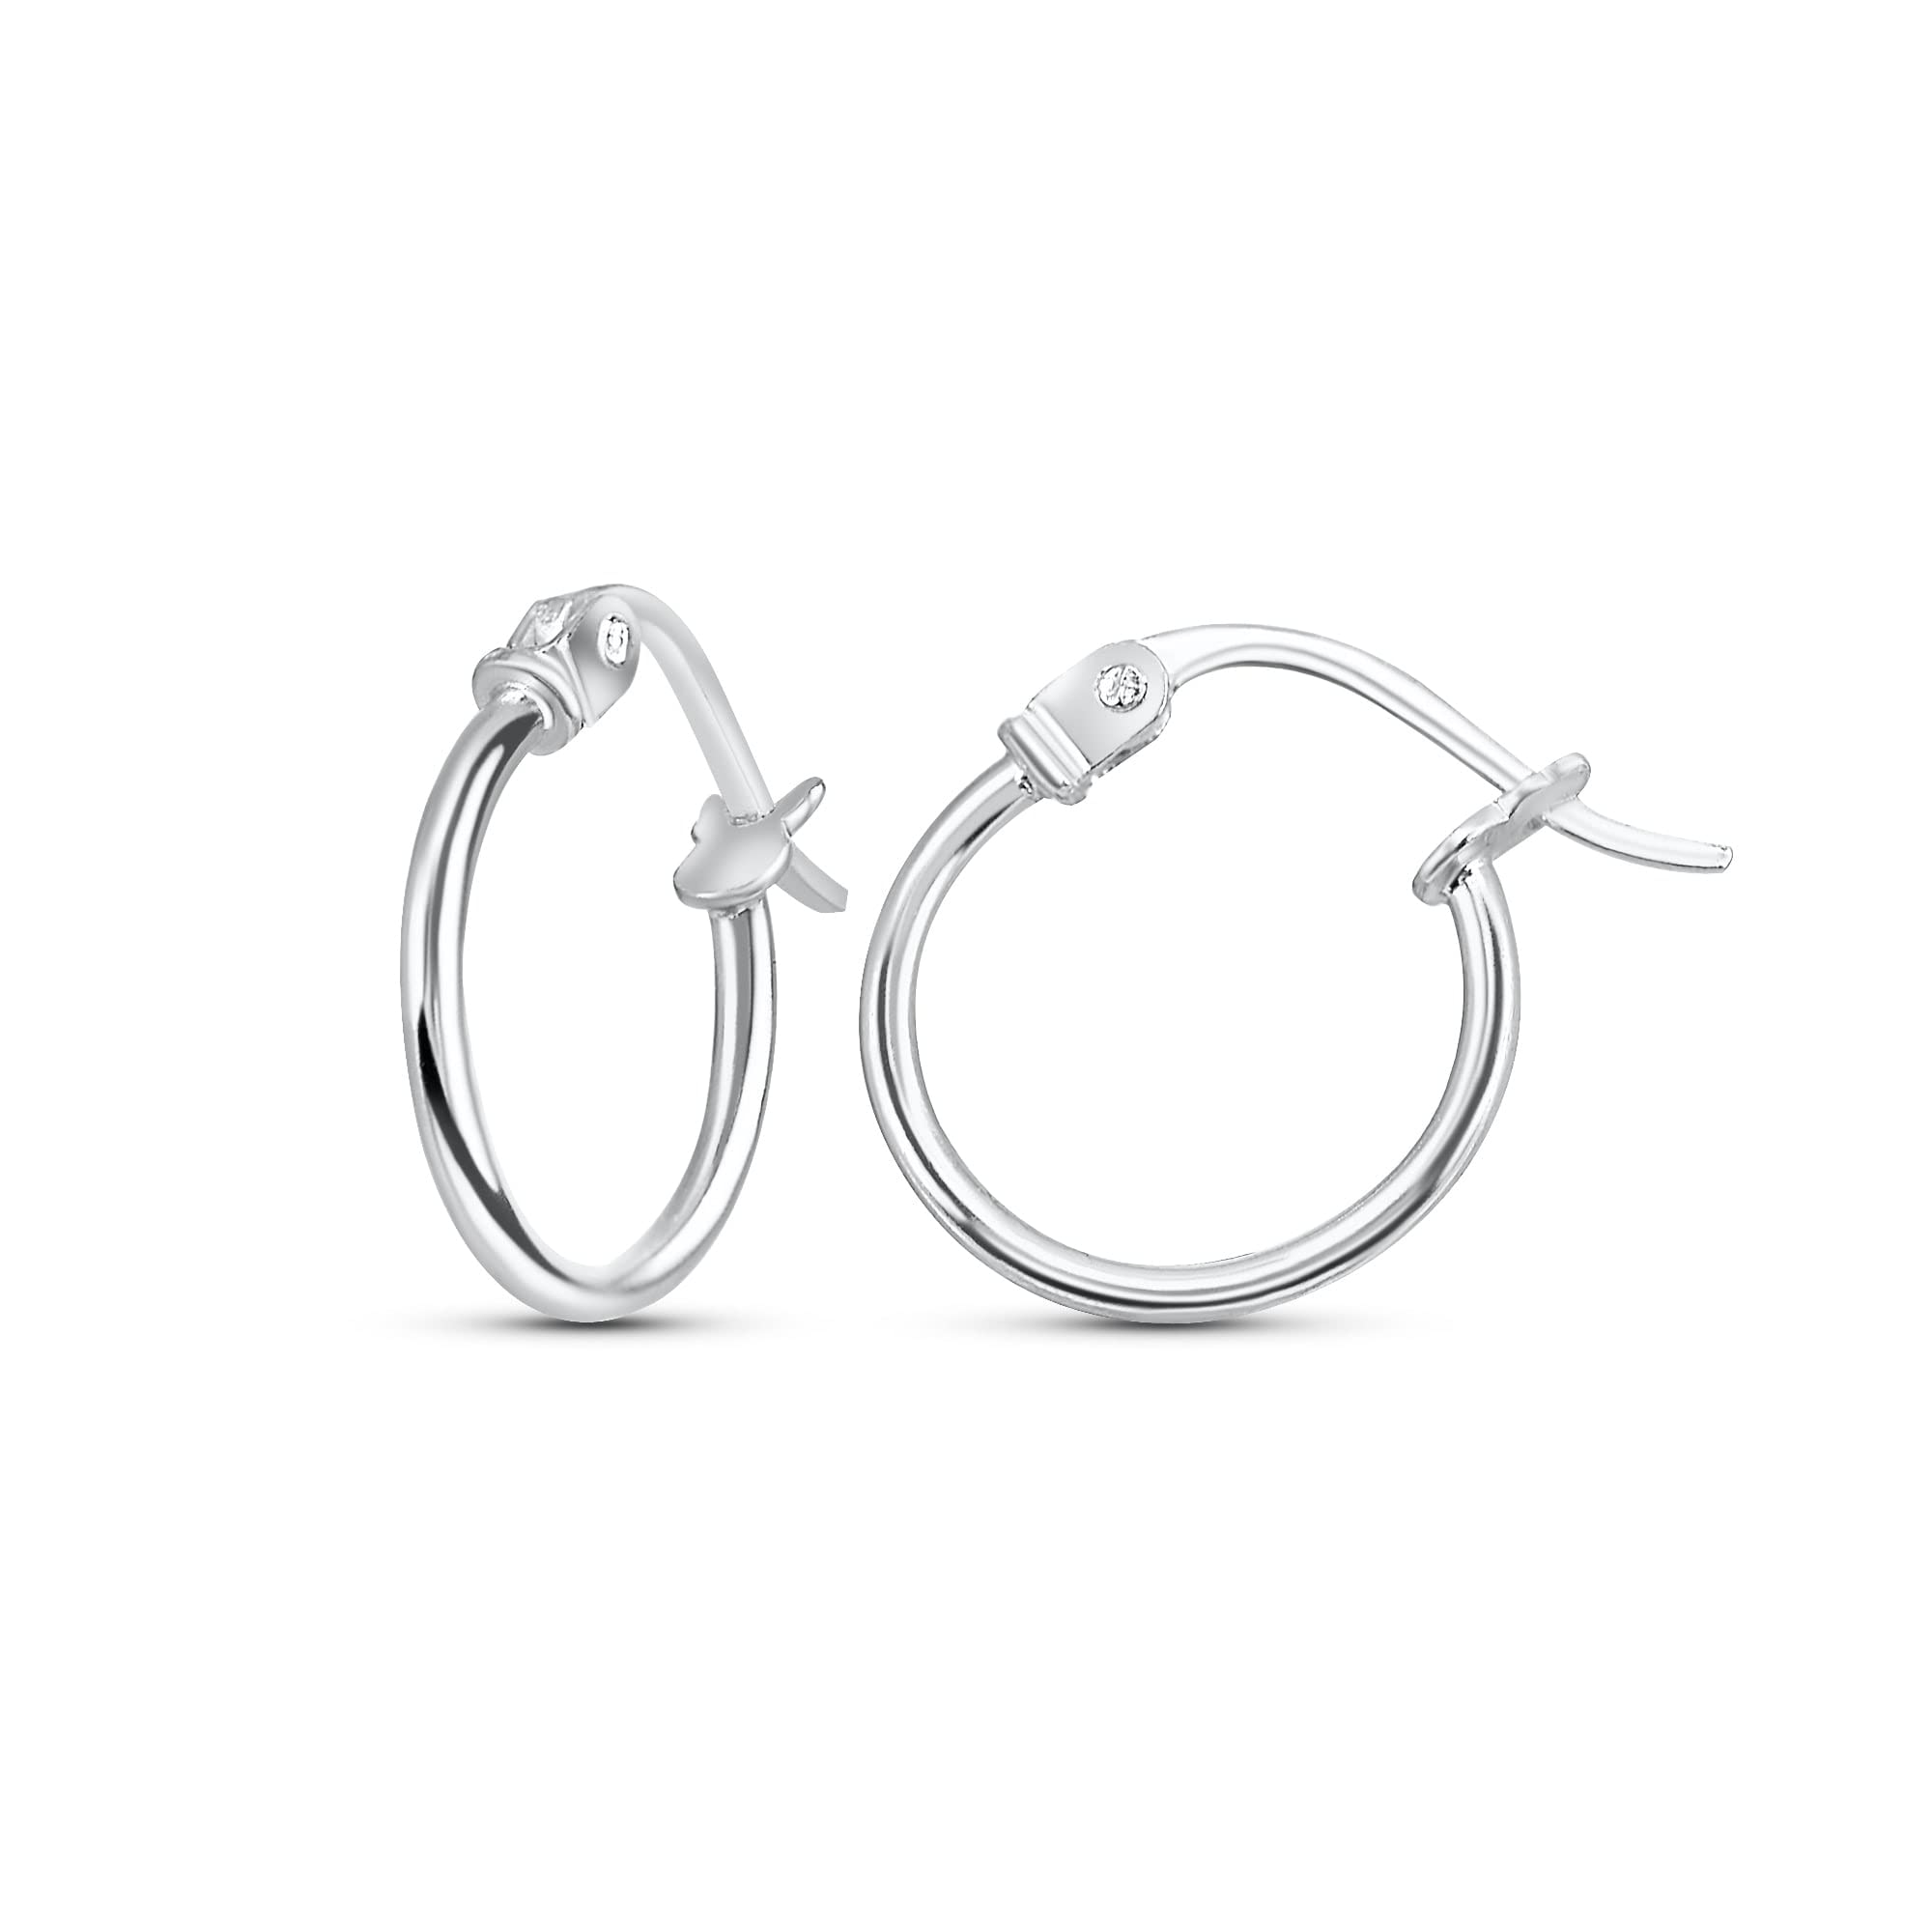 Sterling Silver Thin Light Polished Round Post Hoop Earrings for Women Girls Men, 1-3 Pairs Jewelry Sets